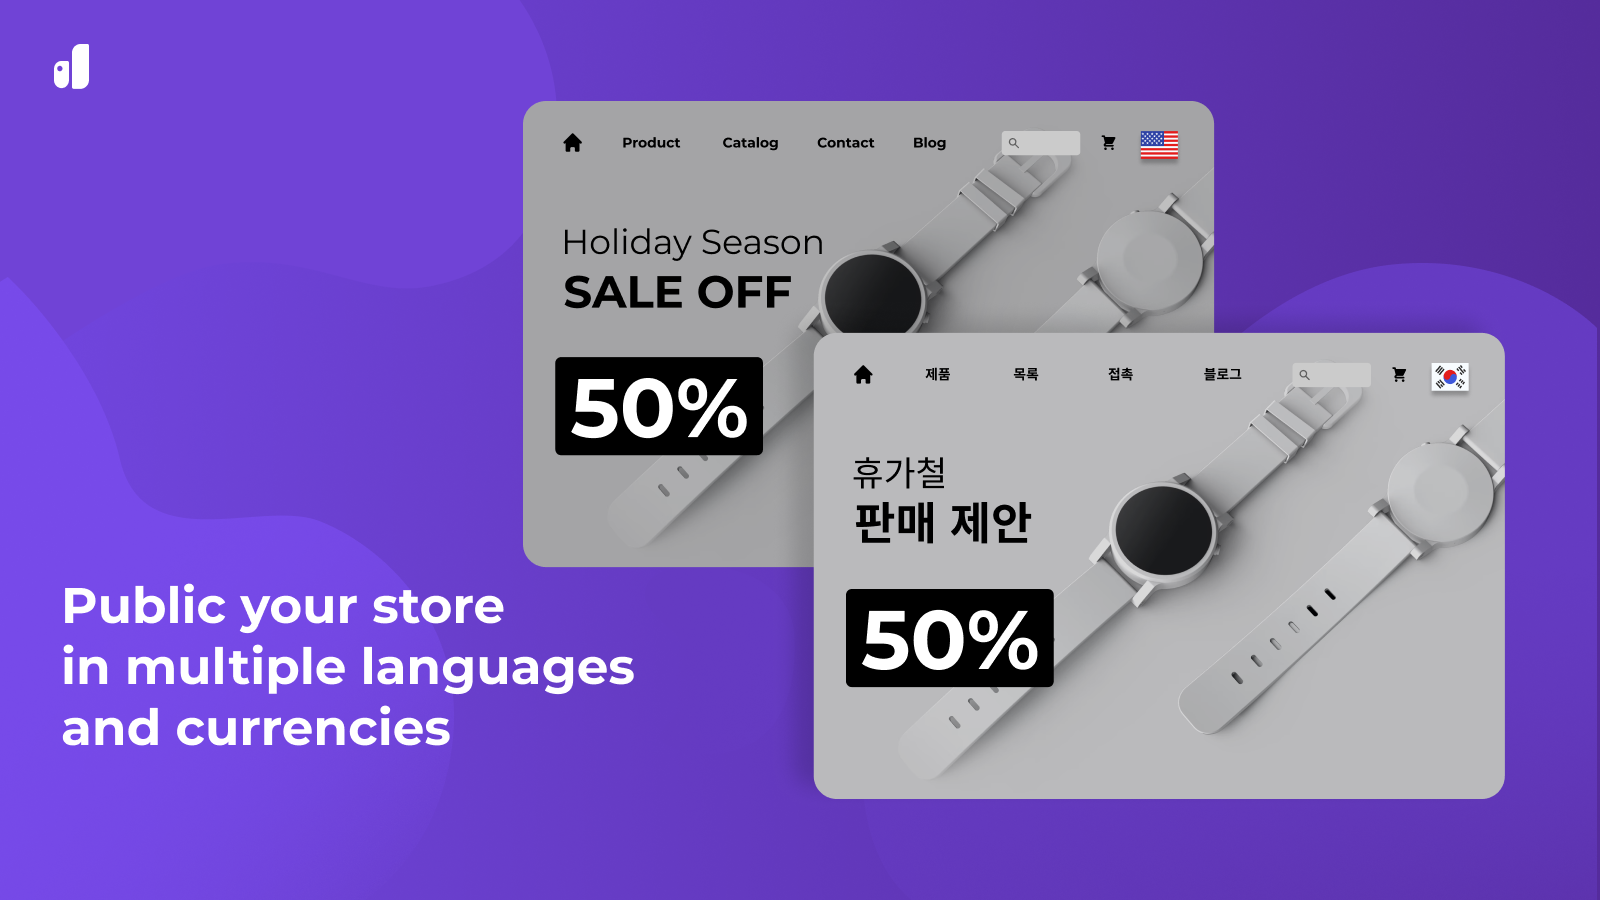 Public your store in multiple languages and currencies